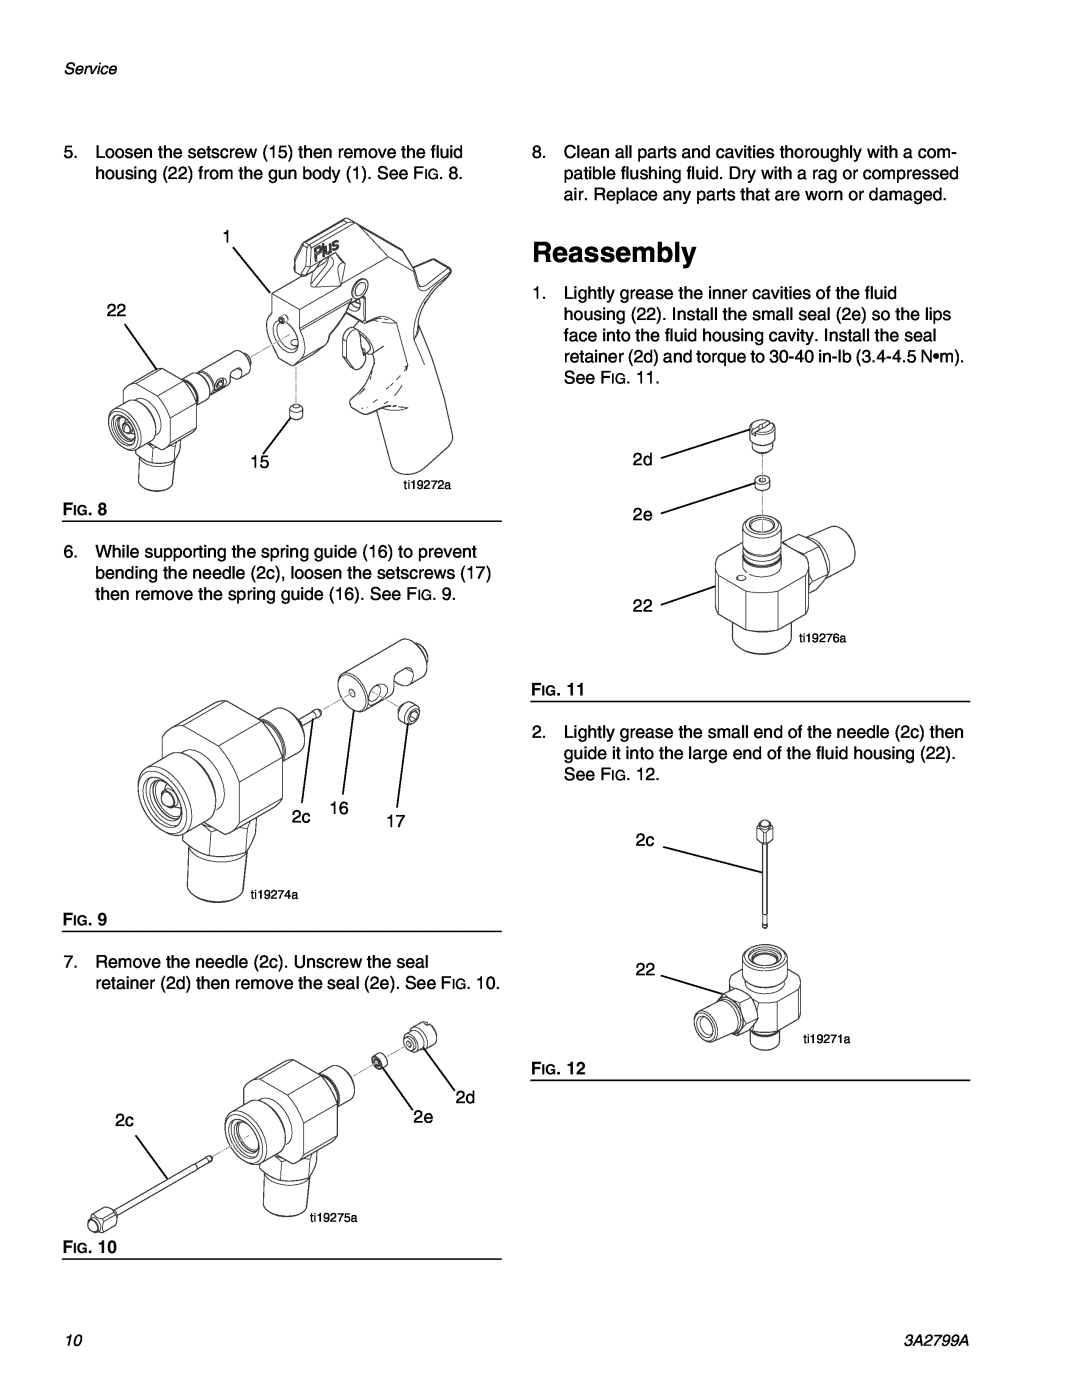 Graco Series A, 262854 important safety instructions Reassembly 